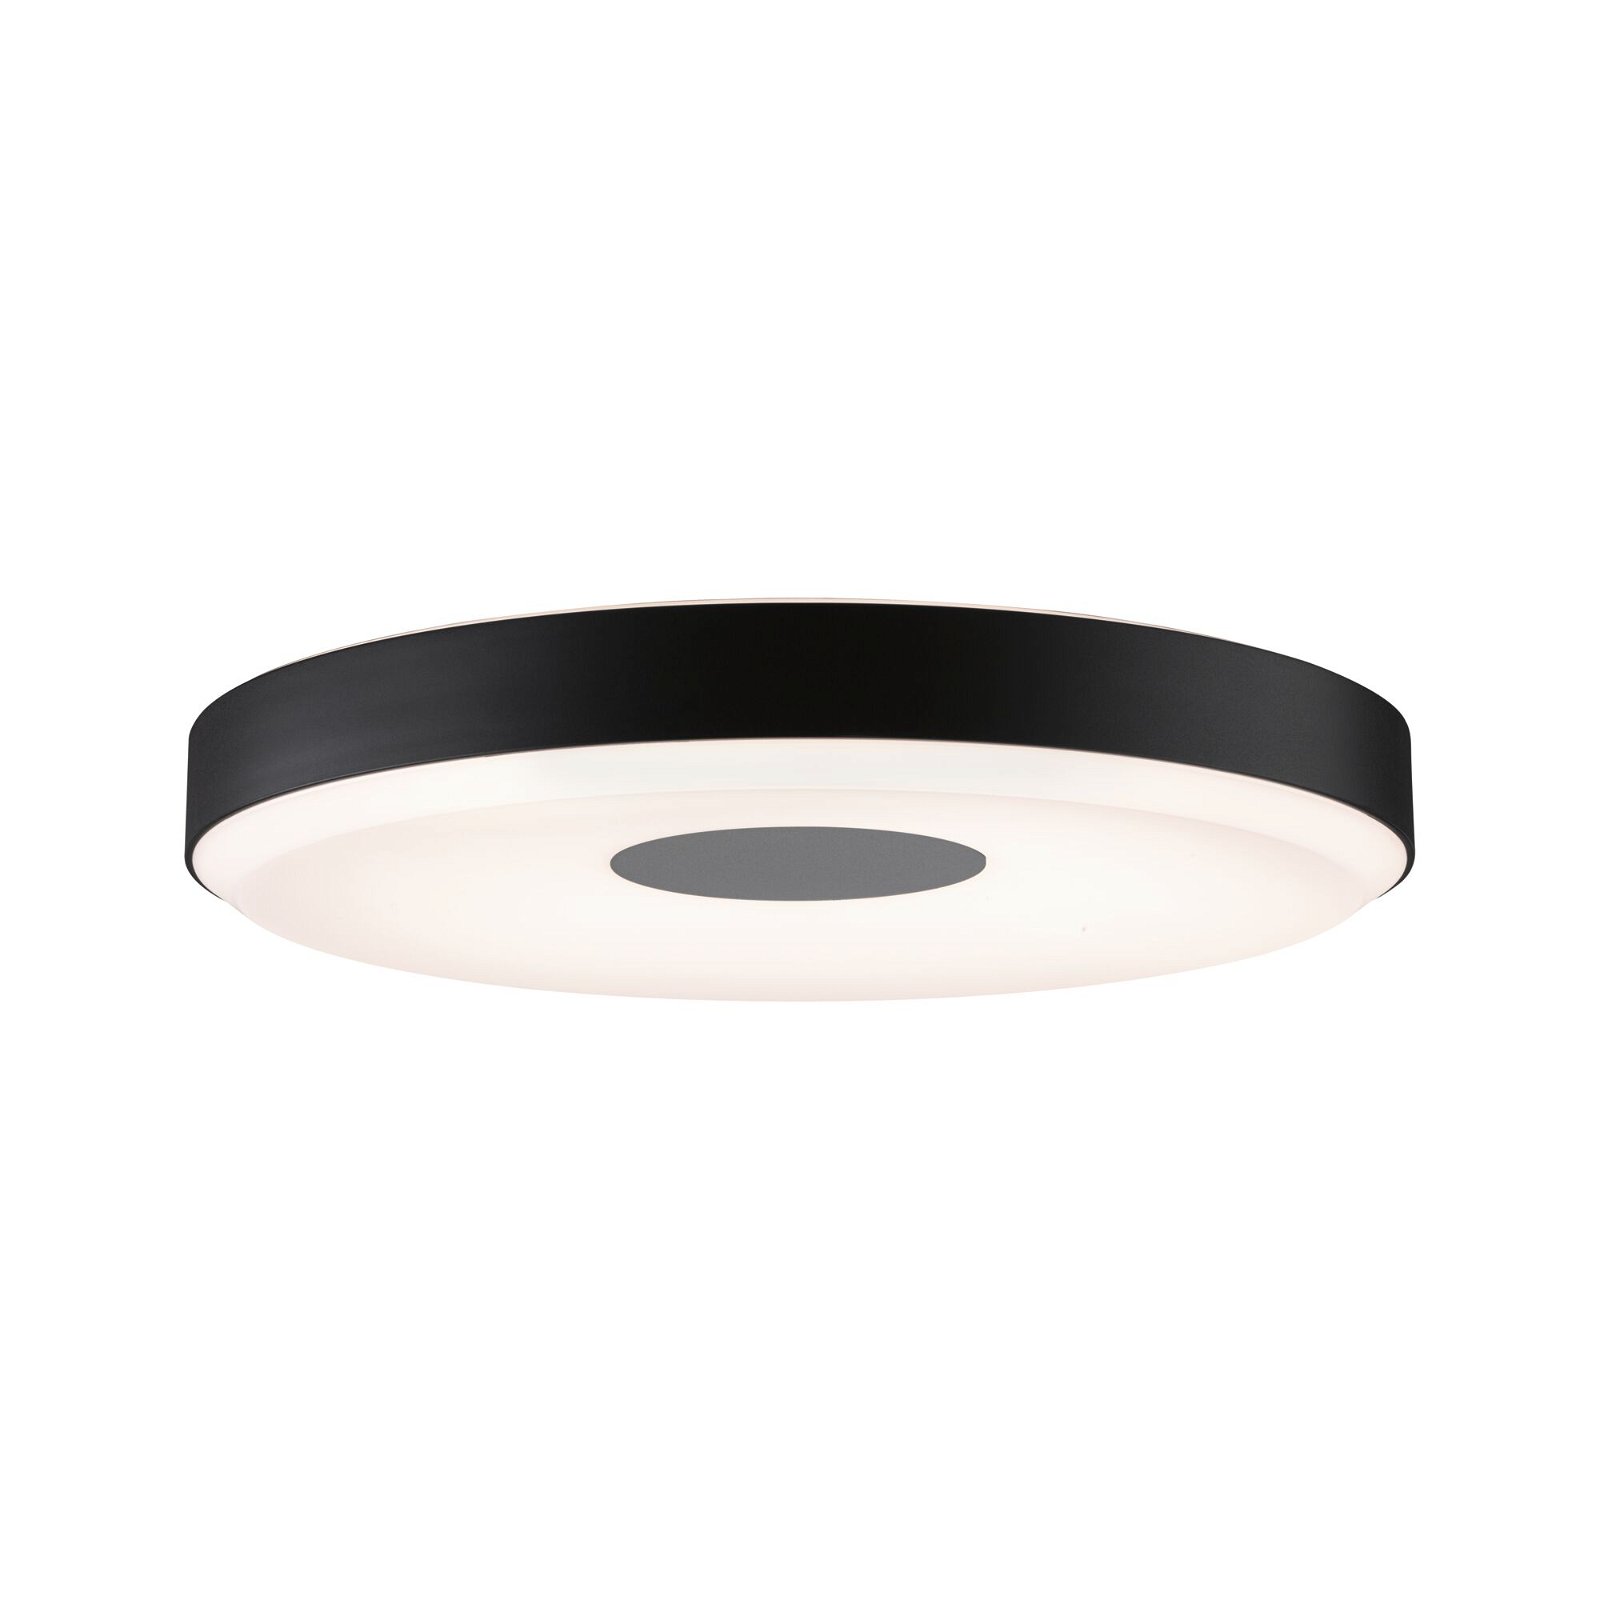 LED Ceiling luminaire Smart Home Zigbee 3.0 Puric Pane Effect 2700K 200lm / 1.900lm 230V 16 / 1x1,5W dimmable Black/Grey